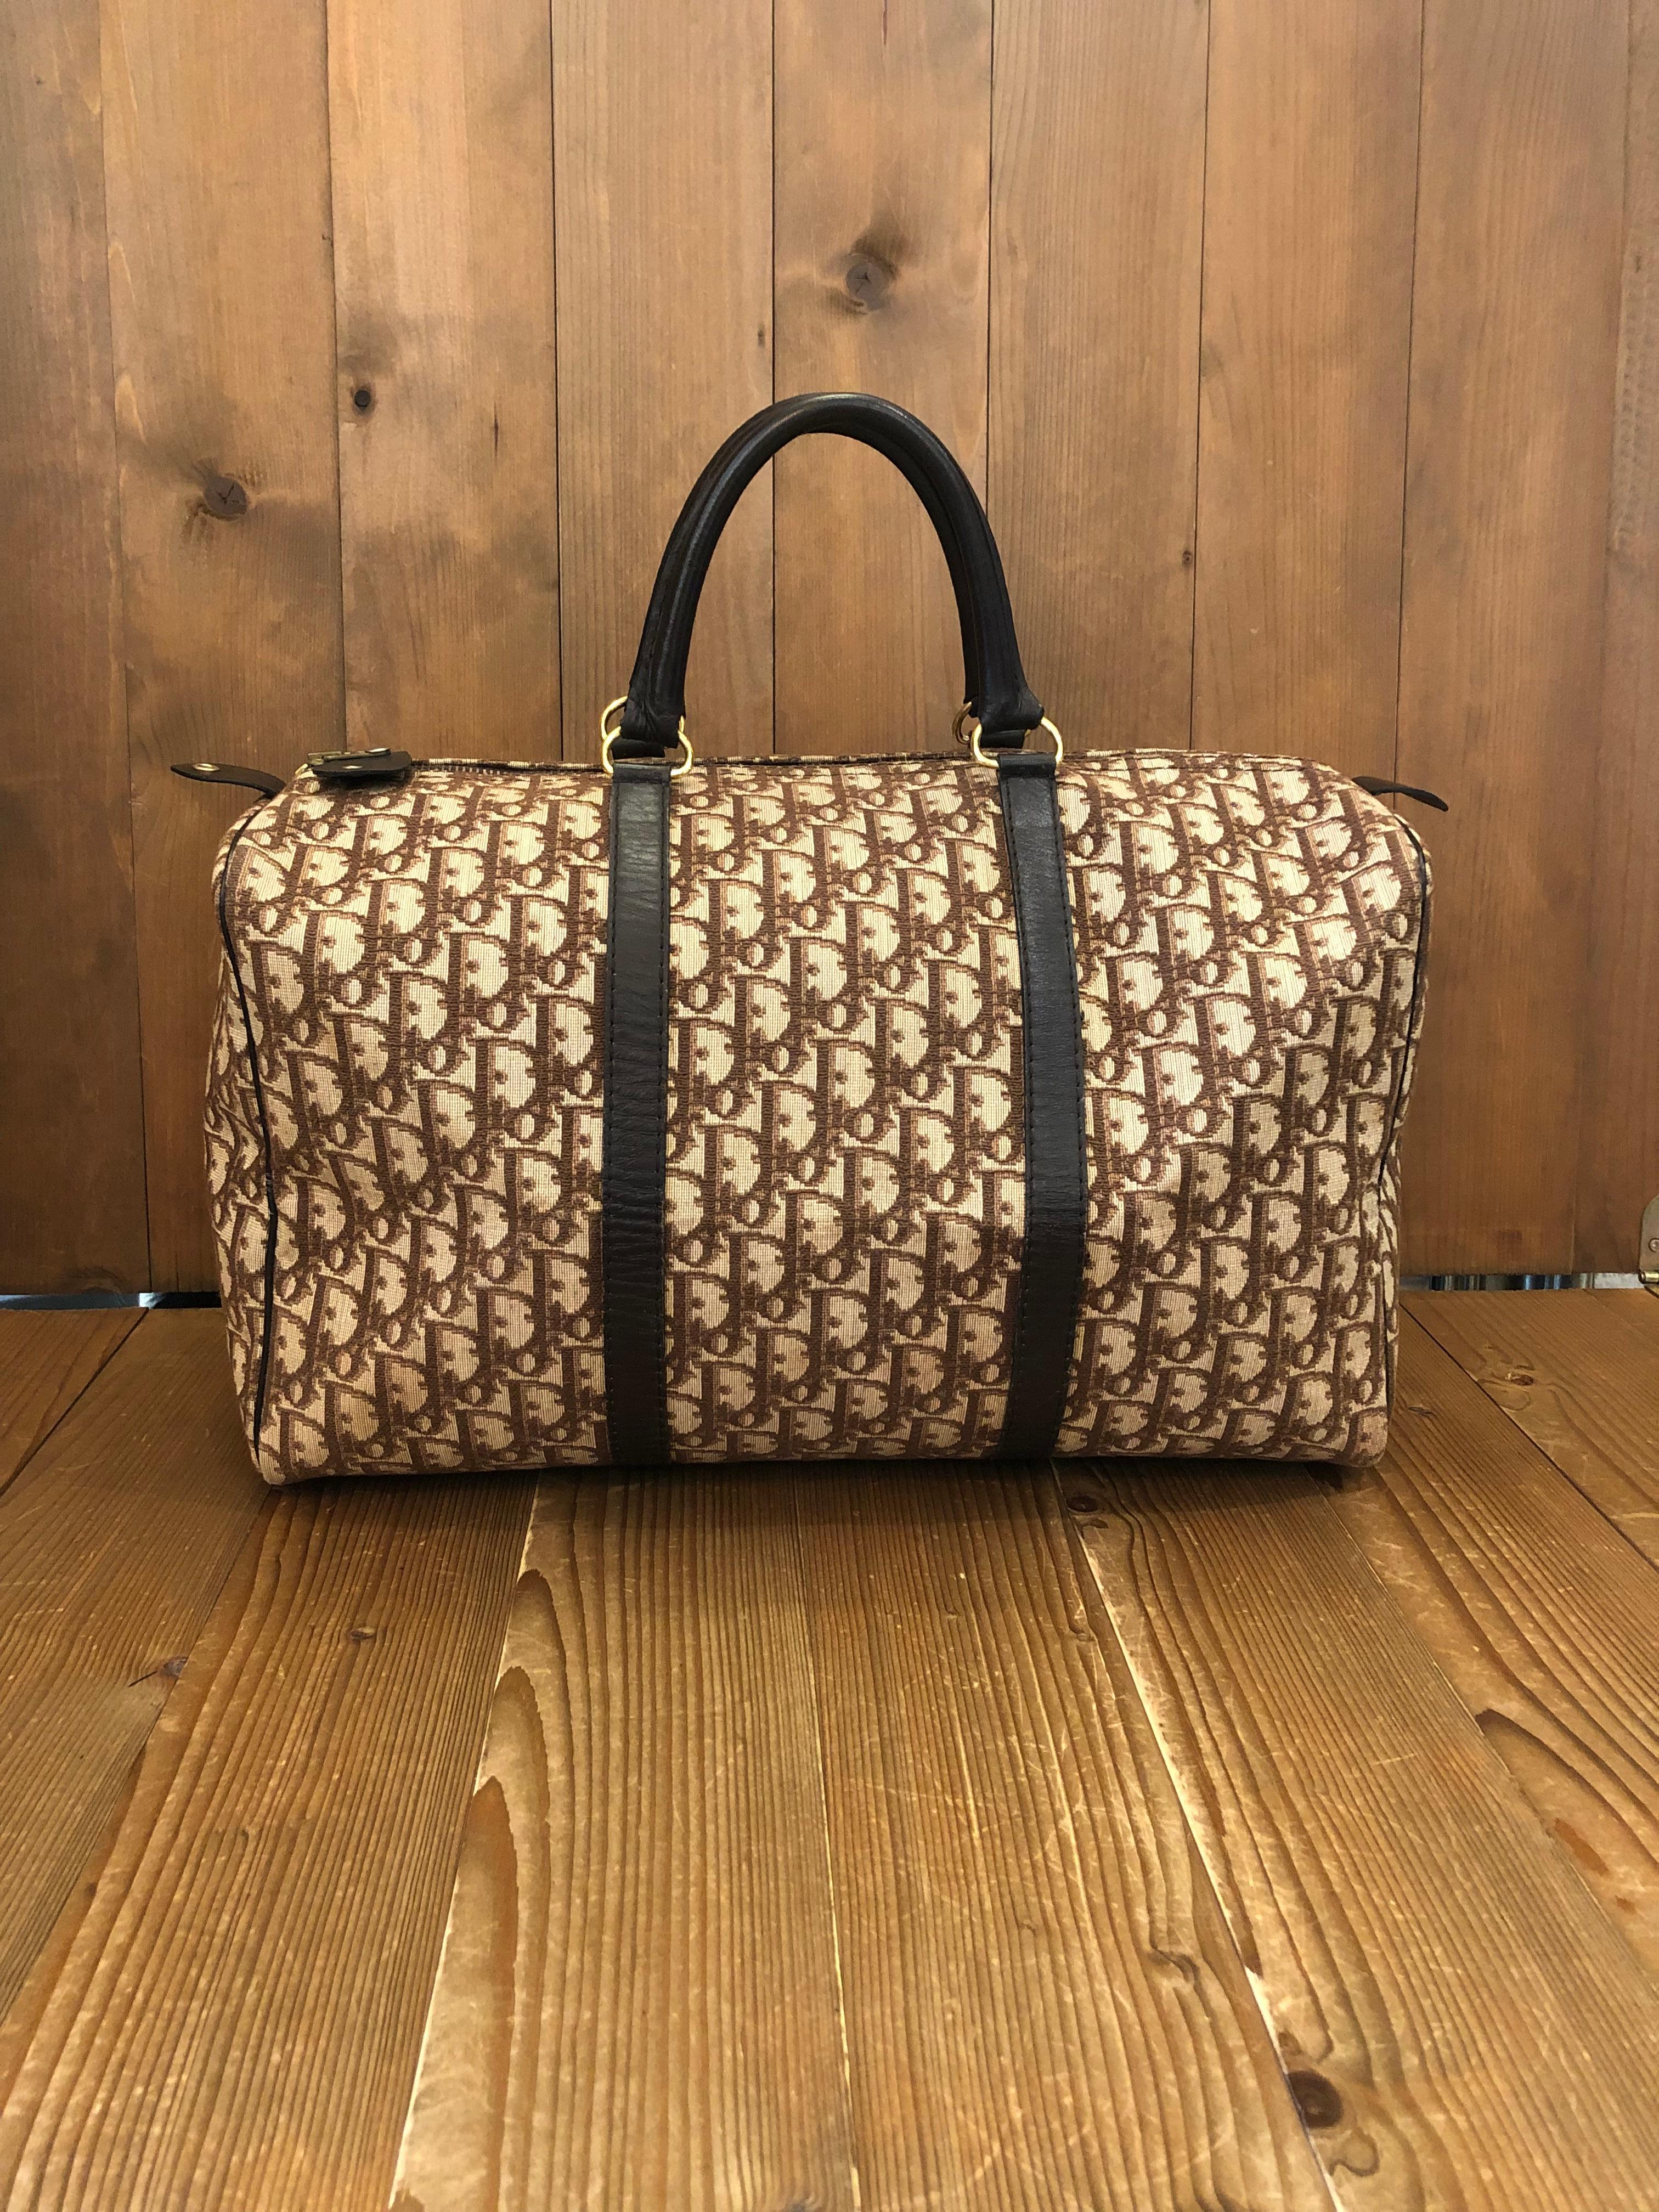 This vintage CHRISTIAN DIOR boston bag is crafted of iconic Dior Trotter jacquard in brown. Top zipper closure opens to a beige canvas interior with one zippered pocket. Made in France. Measures 15.75 x 10 x 7 inches handle drop 5